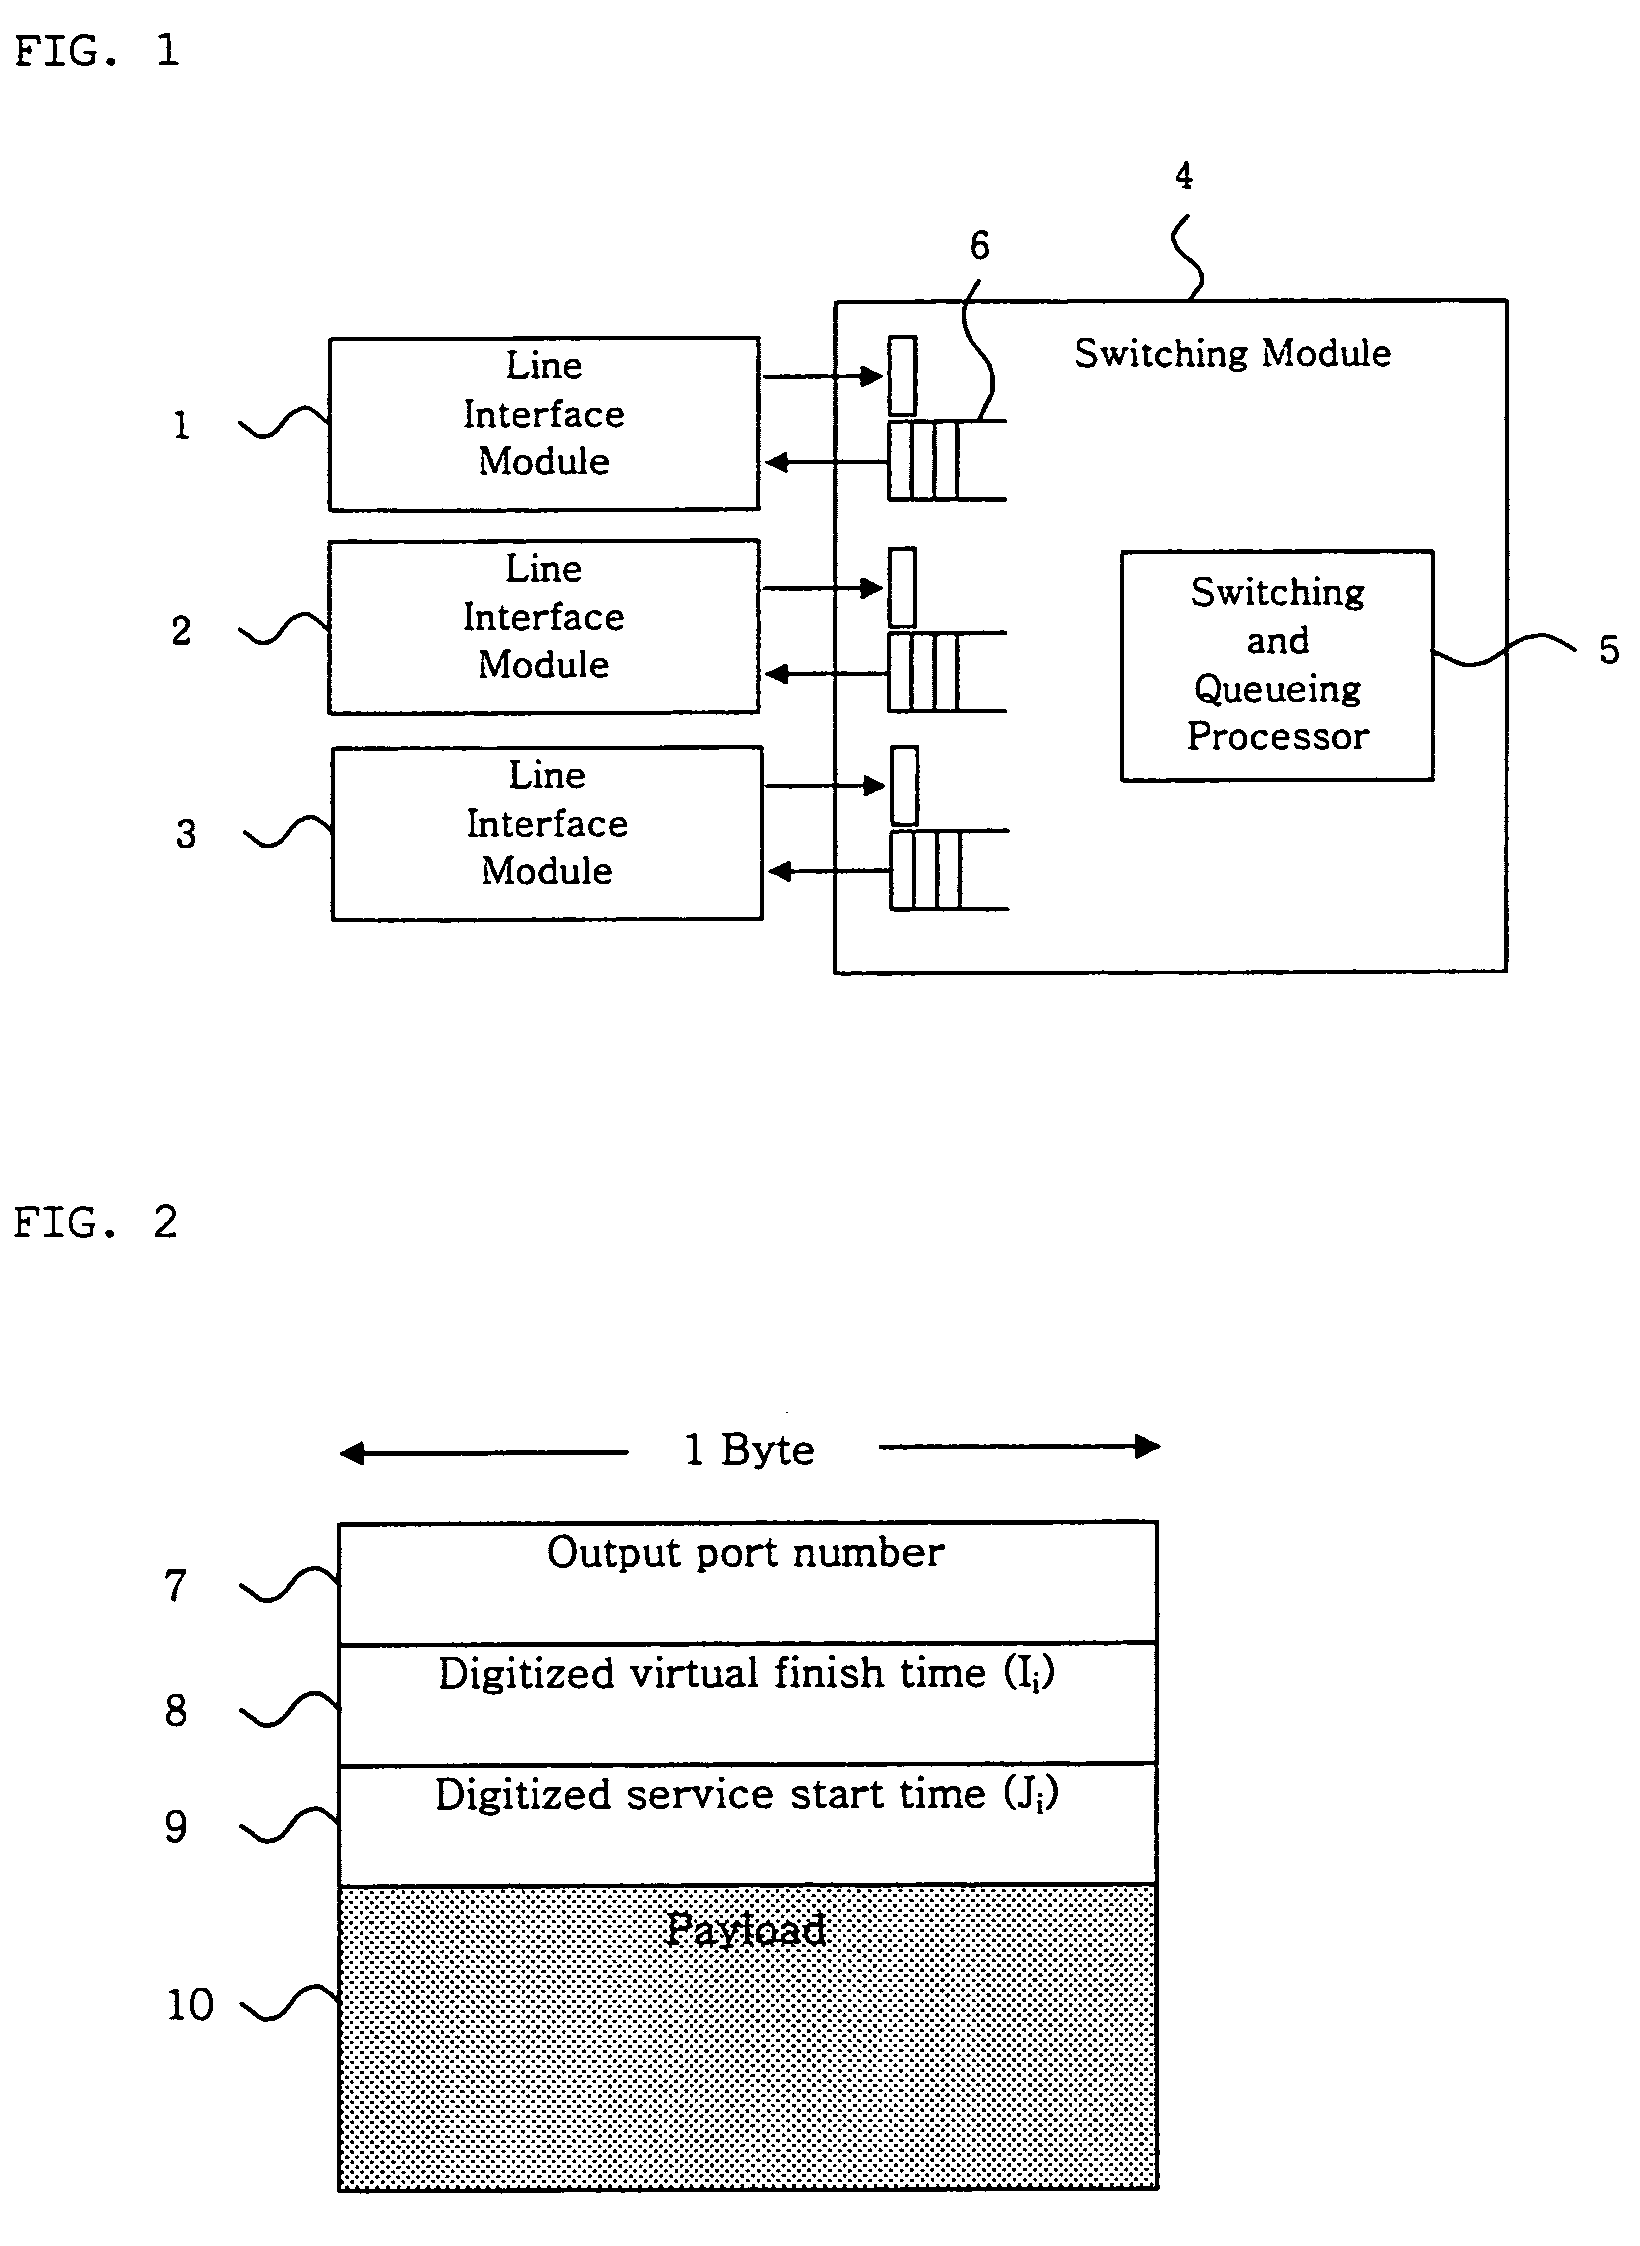 Router using clock synchronizer for distributed traffic control